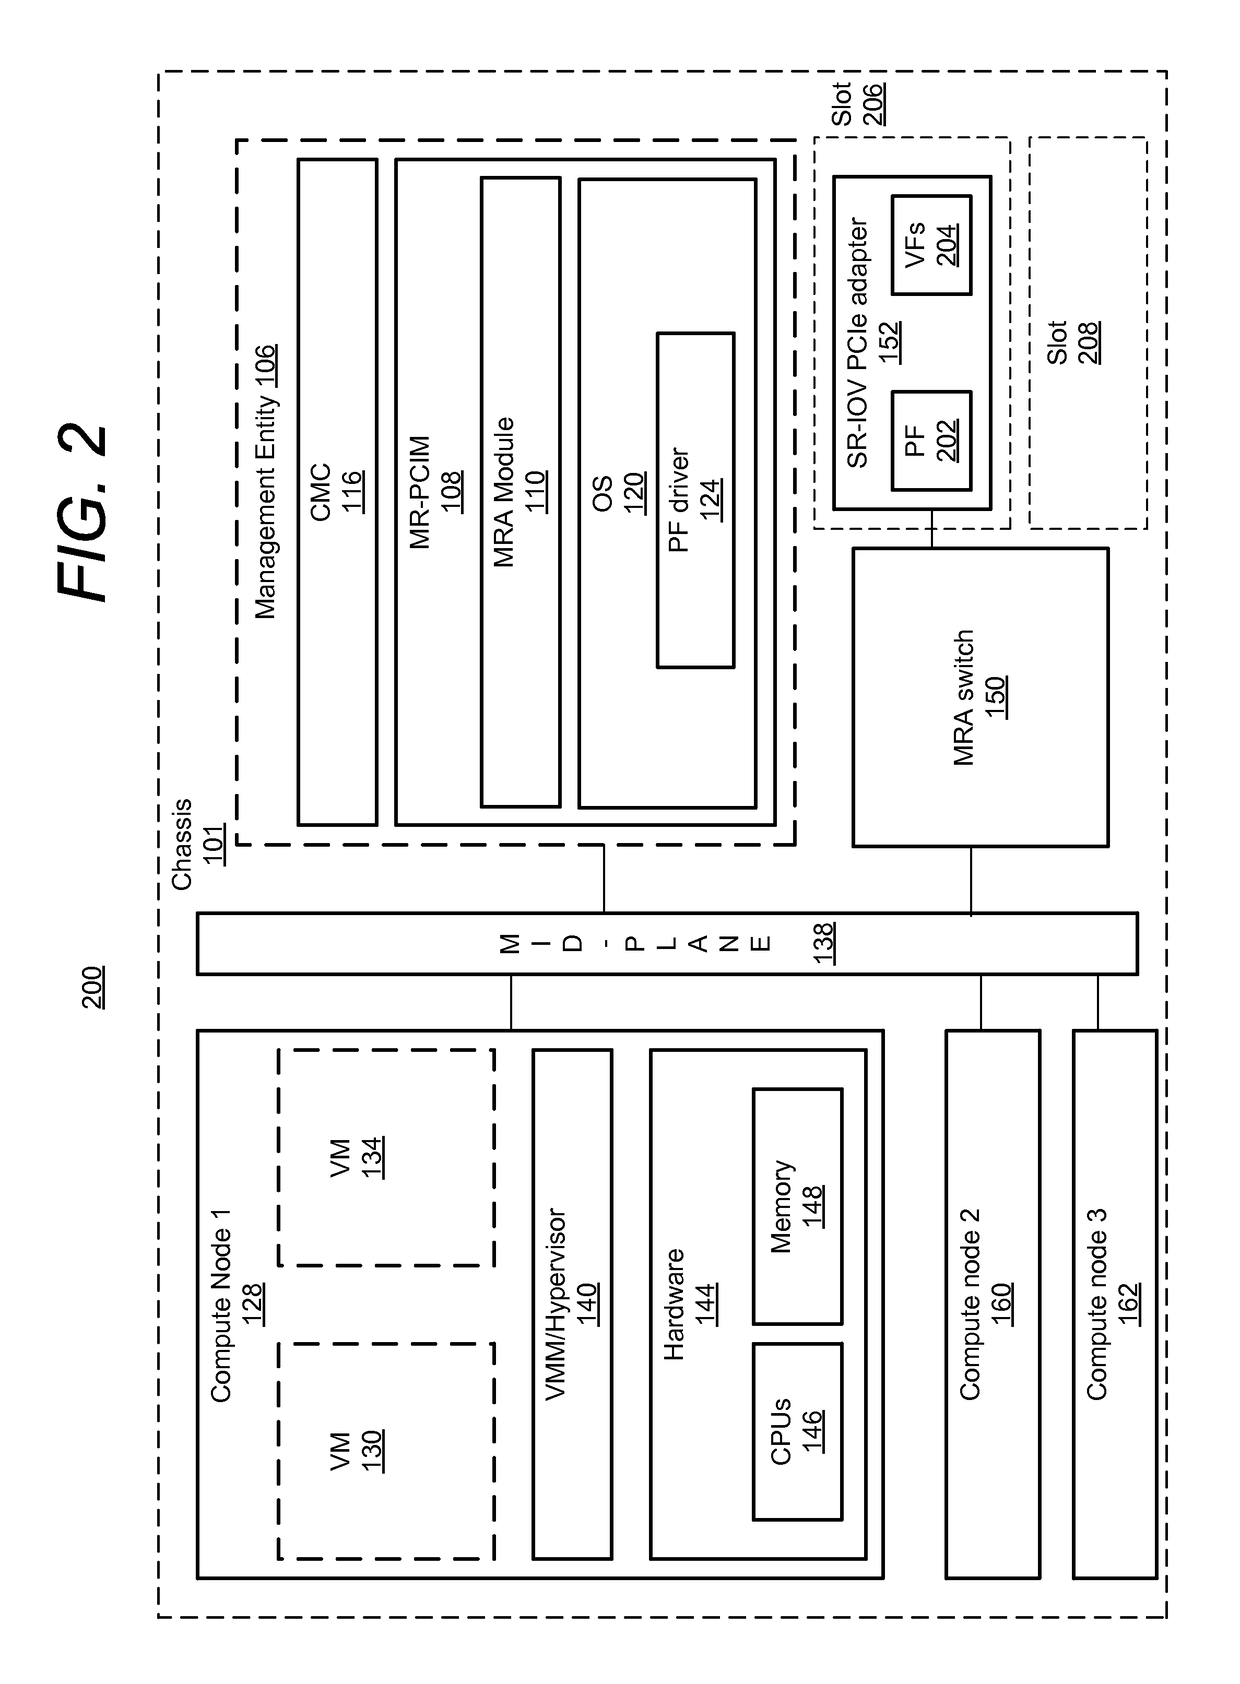 Method for dynamic configuration of a PCIE slot device for single or multi root ability